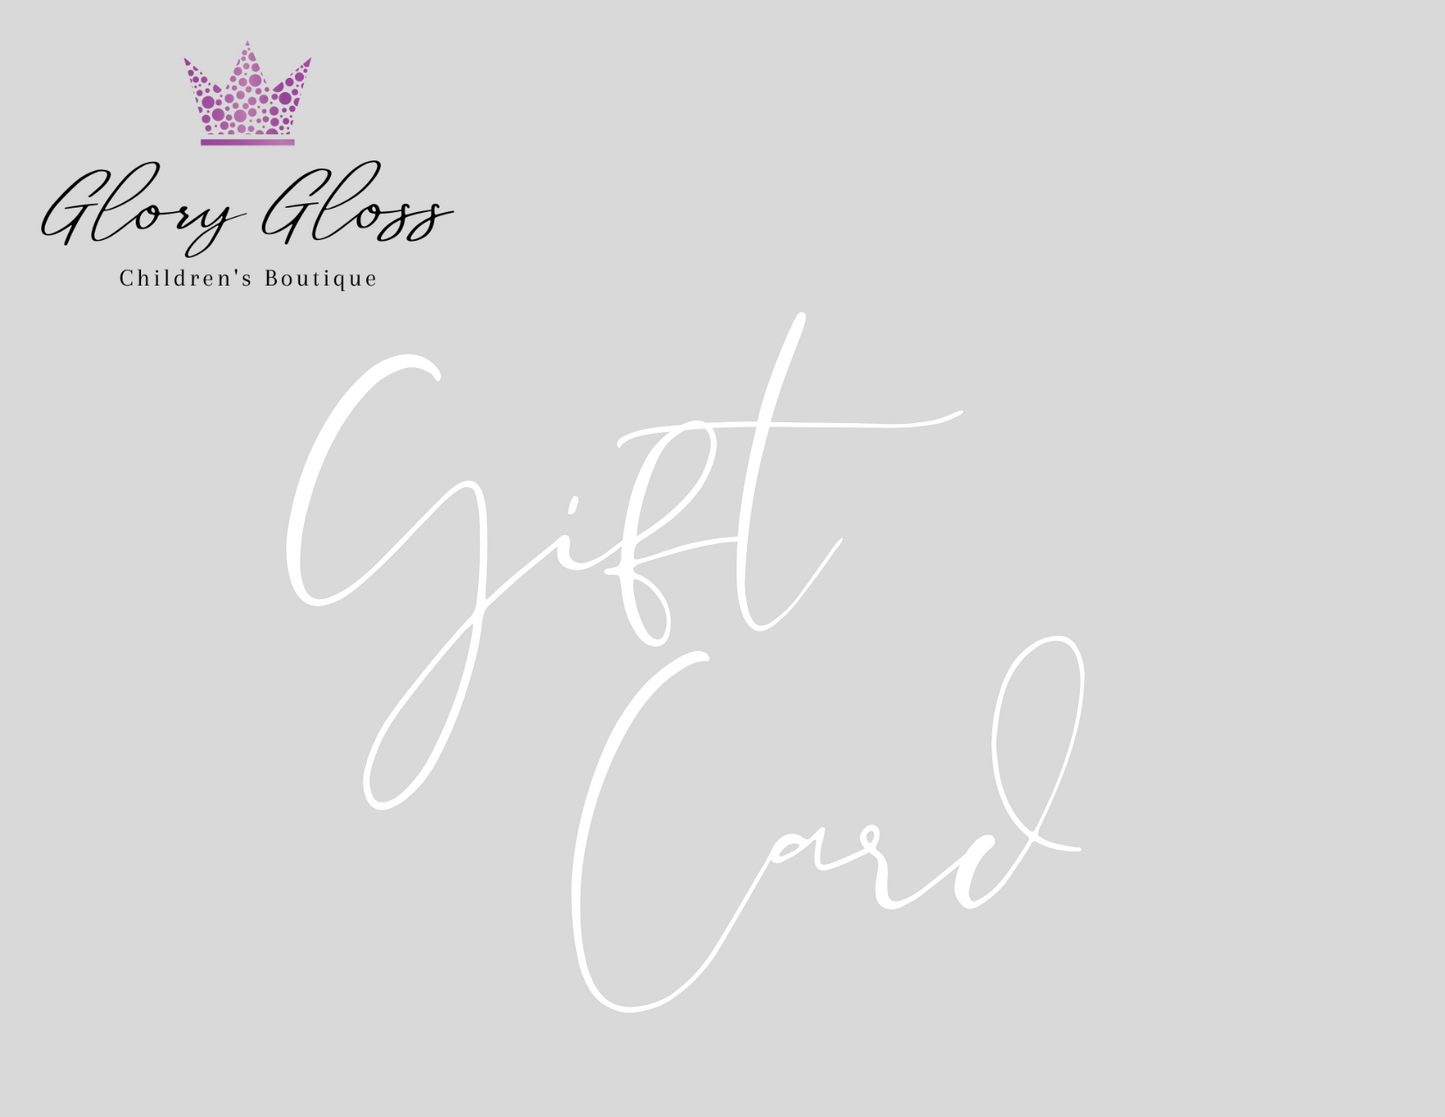 Glory Gloss Children's Boutique Gift Card